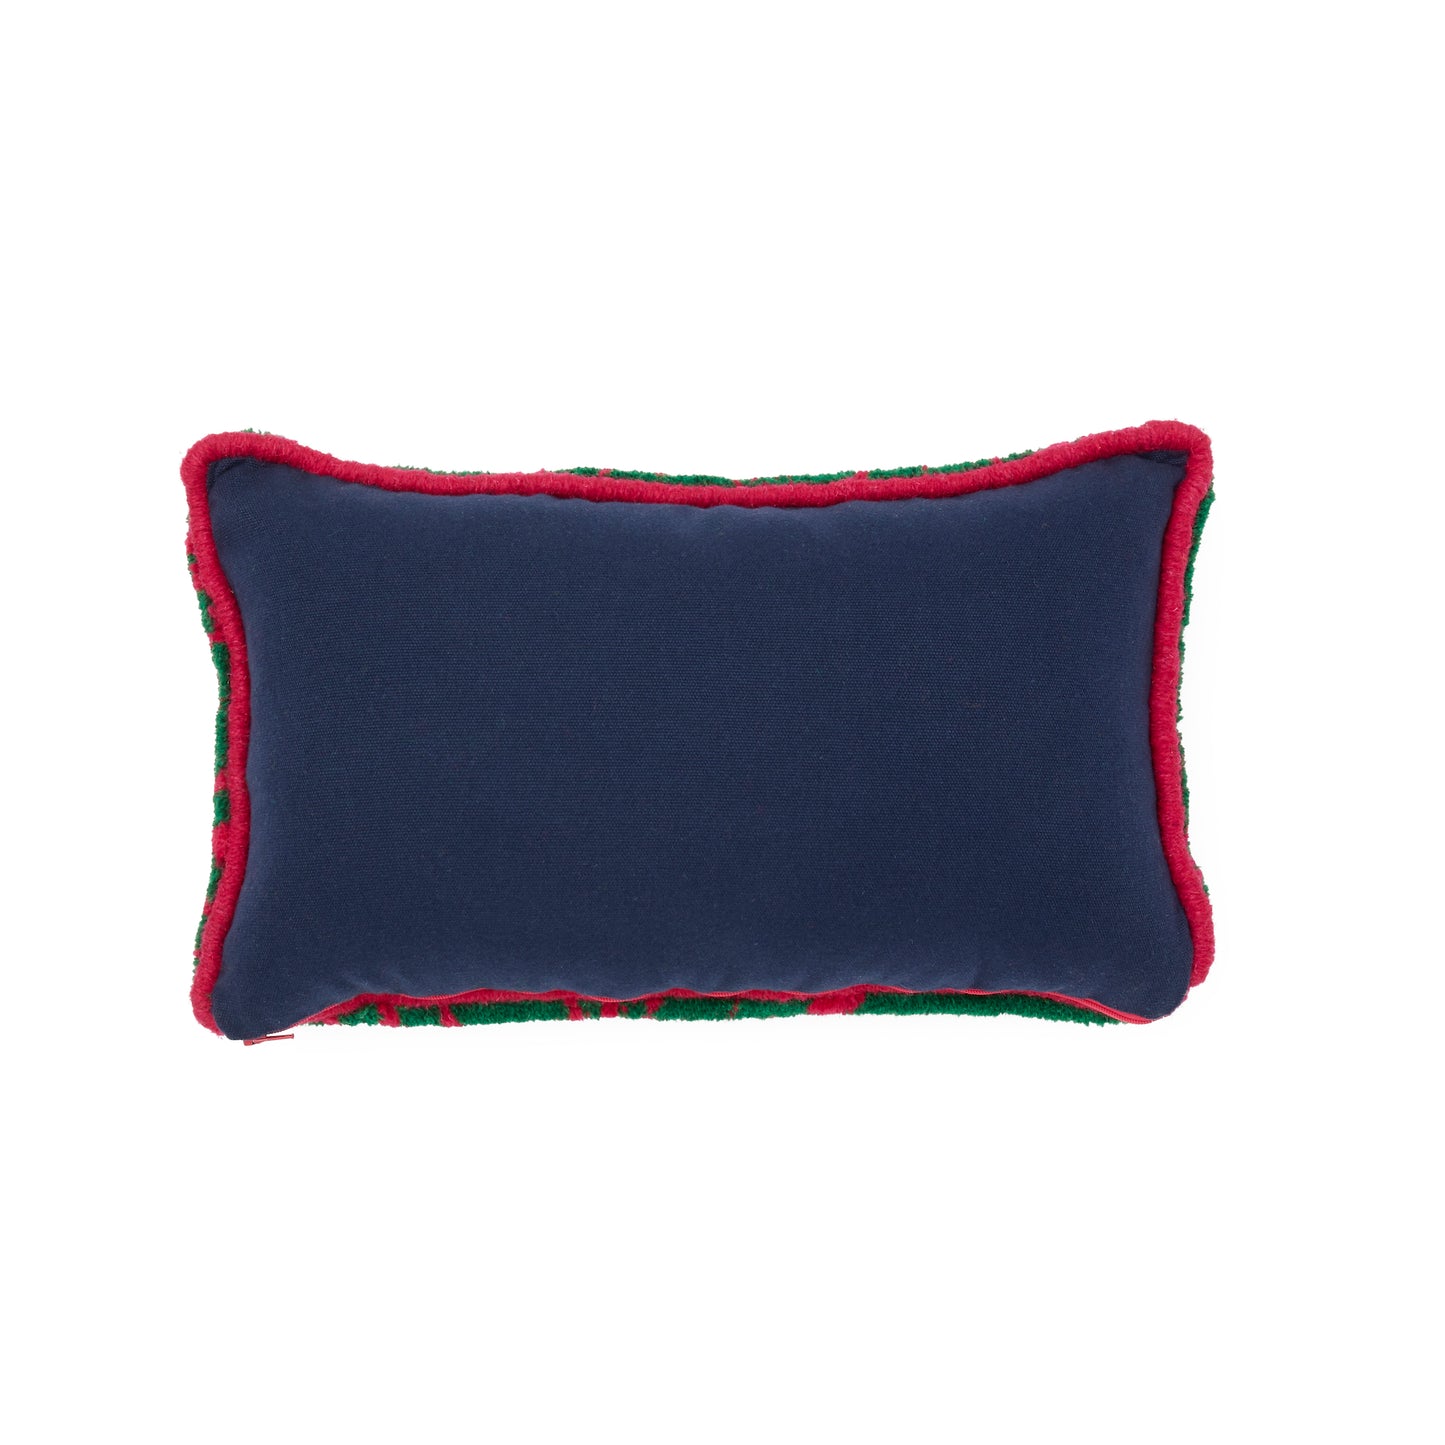 WINTER WATERMELON - GREEN AND MAGENTA TUFTED CUSHION